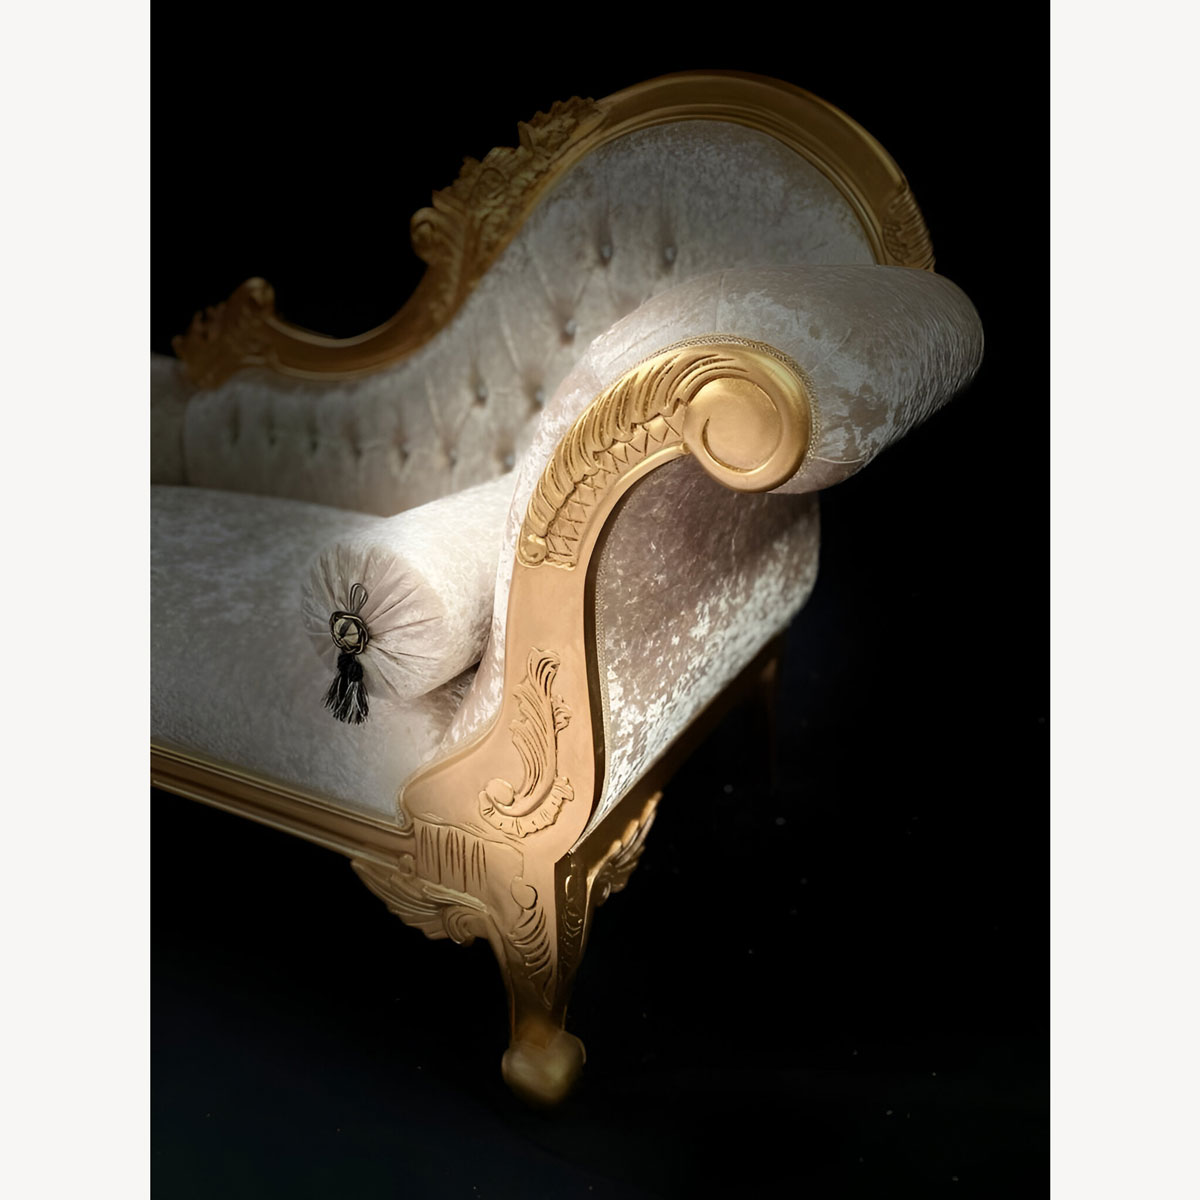 Chaise Hampshire Sofa In Gold Leaf Frame Upholstered In Ivory Cream Crushed Velvet With Crystal Buttoning 3 - Hampshire Barn Interiors - Chaise Hampshire Sofa In Gold Leaf Frame Upholstered In Ivory Cream Crushed Velvet With Crystal Buttoning -